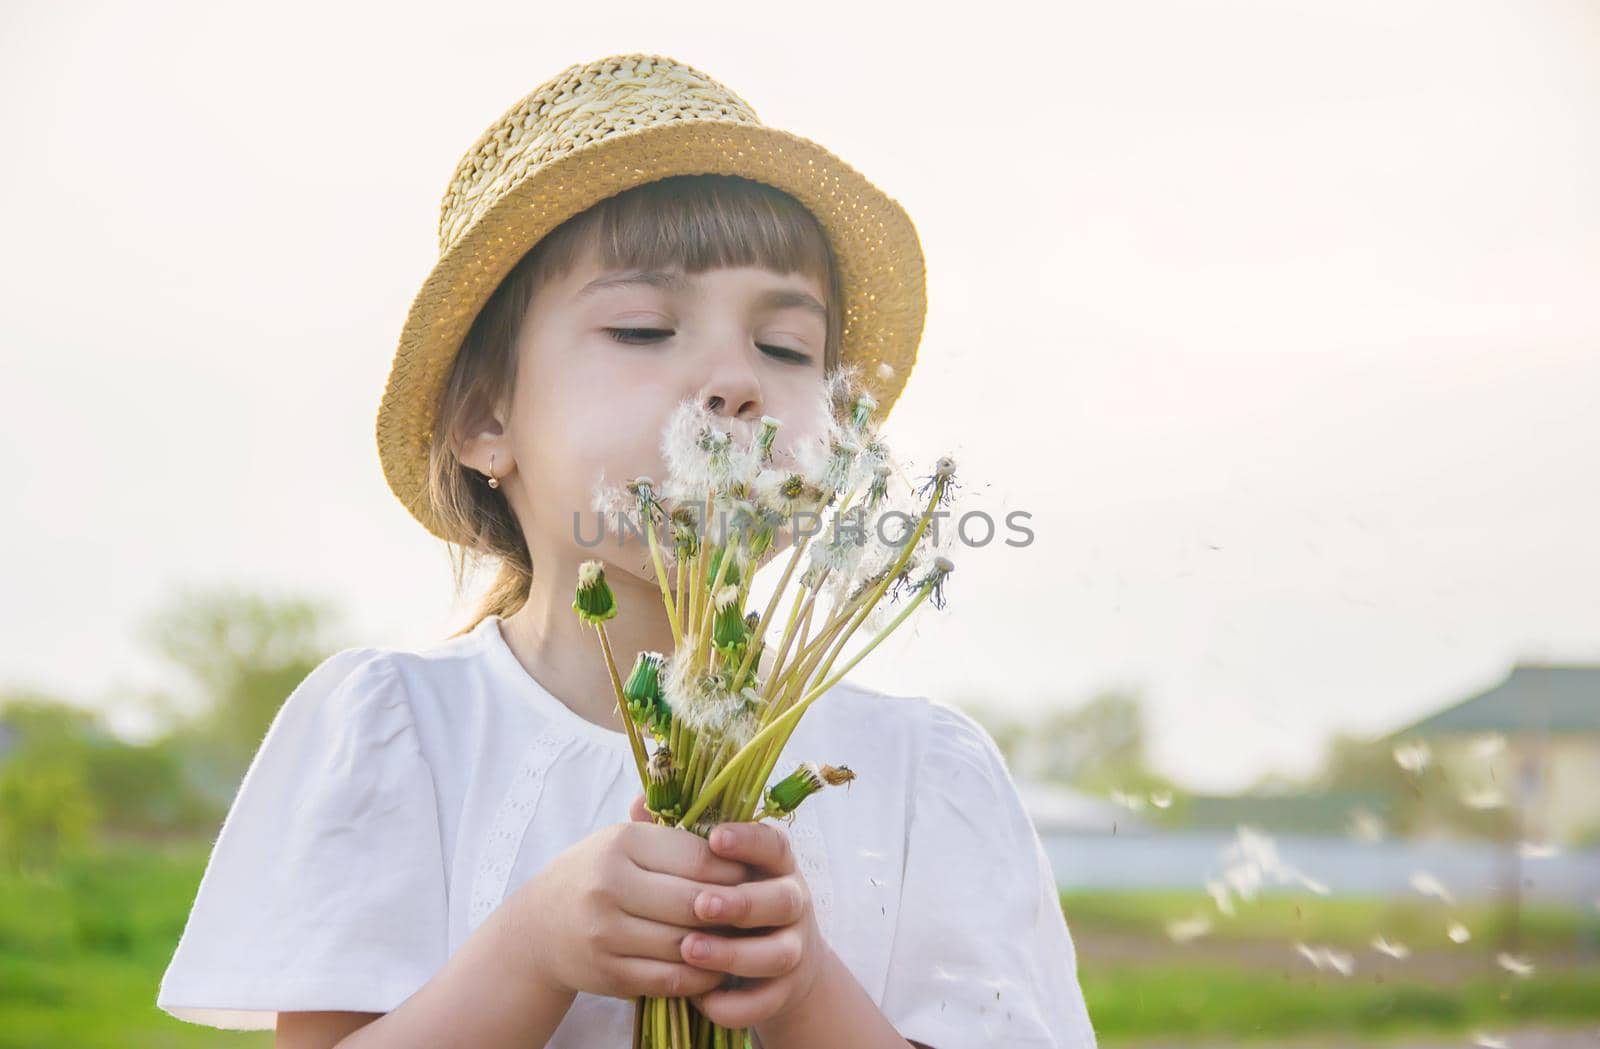 girl blowing dandelions in the air. selective focus. nature.